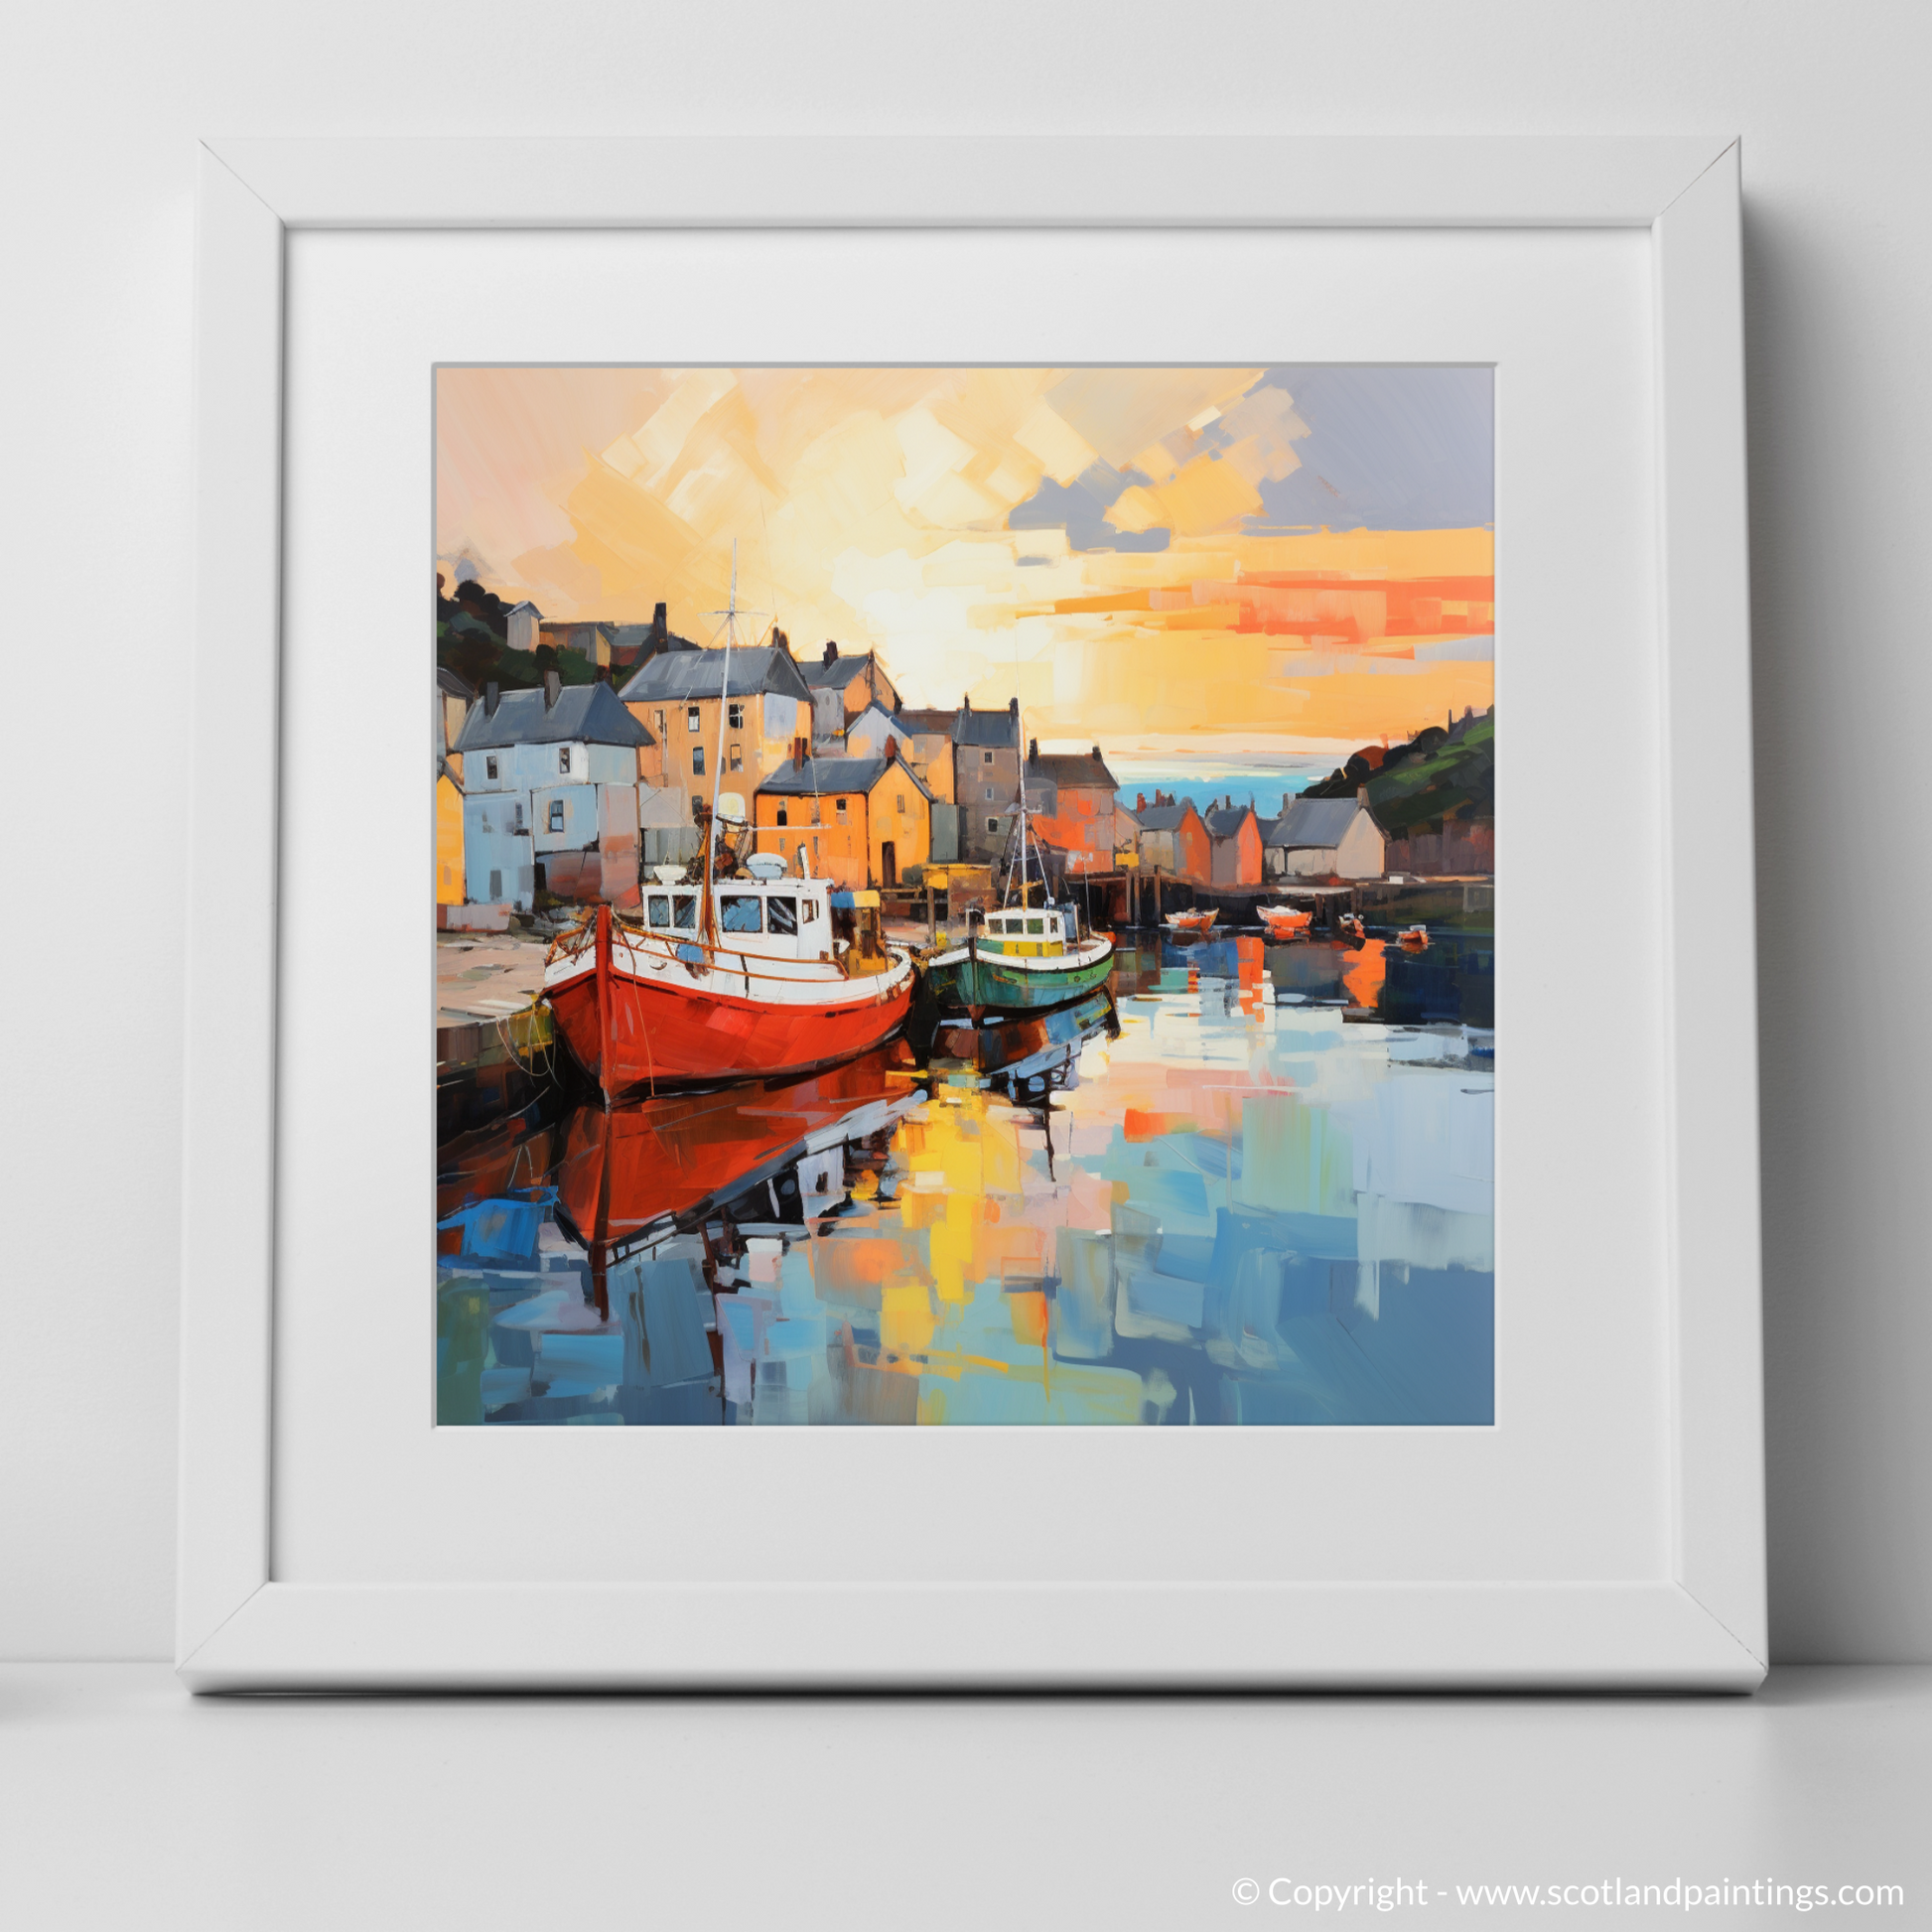 Art Print of Millport Harbour at golden hour with a white frame